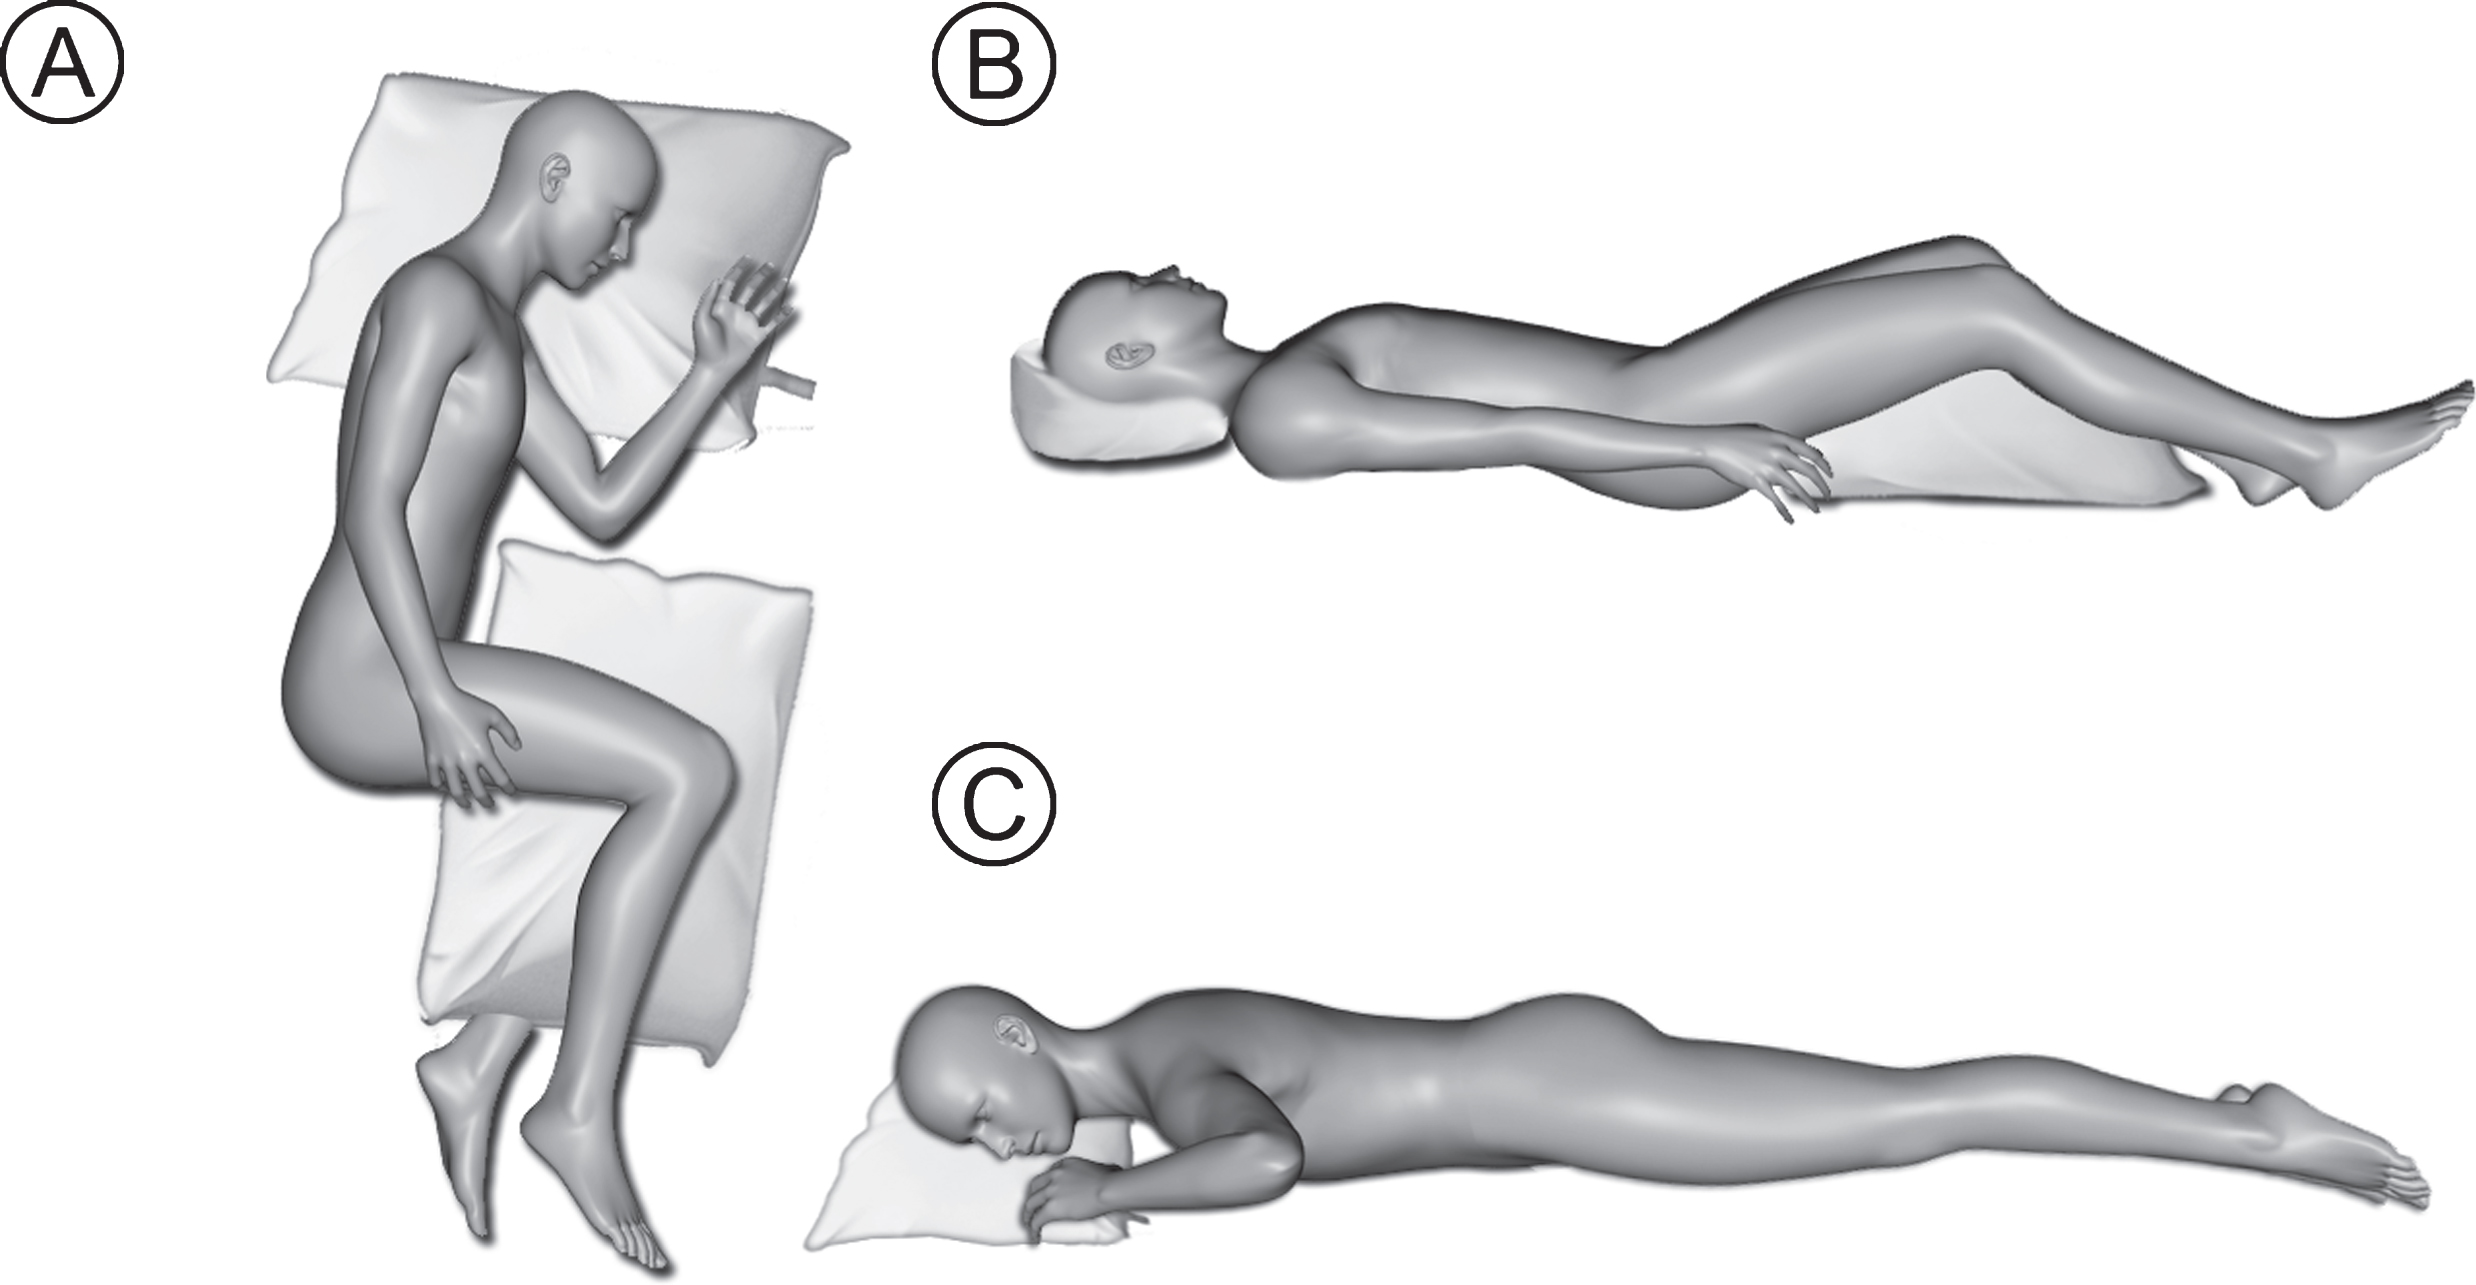 Recommended sleeping positions and pillow orientation (A - lateral position and B –supine sleep position). Not recommended prone sleep position (C –prone sleep position).